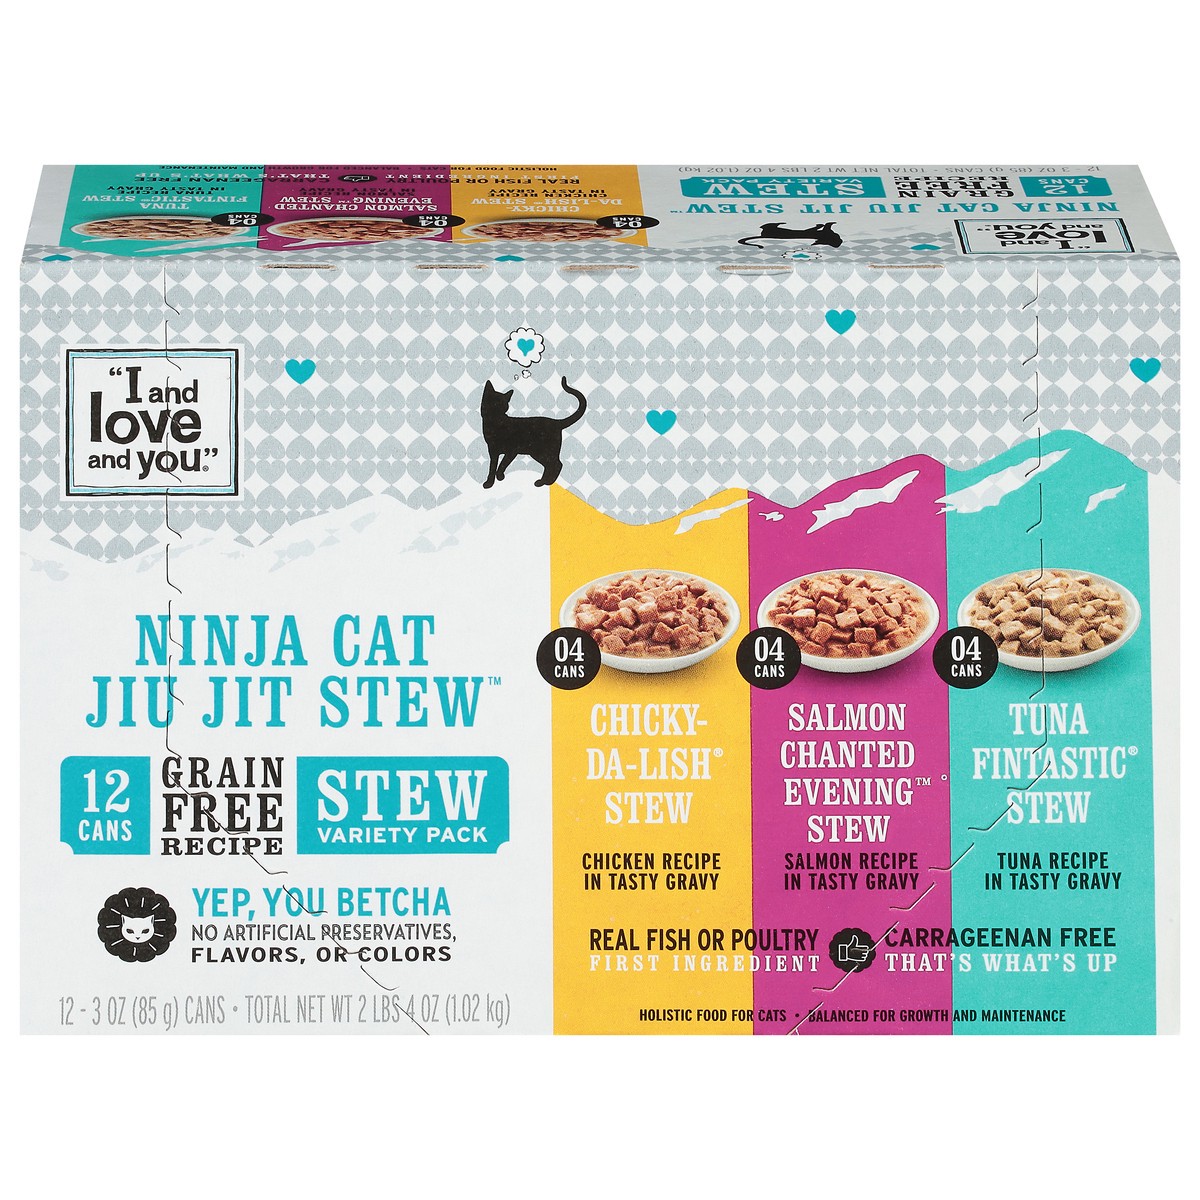 slide 1 of 13, I and Love and You Grain Free Recipe Ninja Cat Jiu Jit Stew Holistic Food for Cats Stew Variety Pack 12 - 3 oz Cans, 12 ct